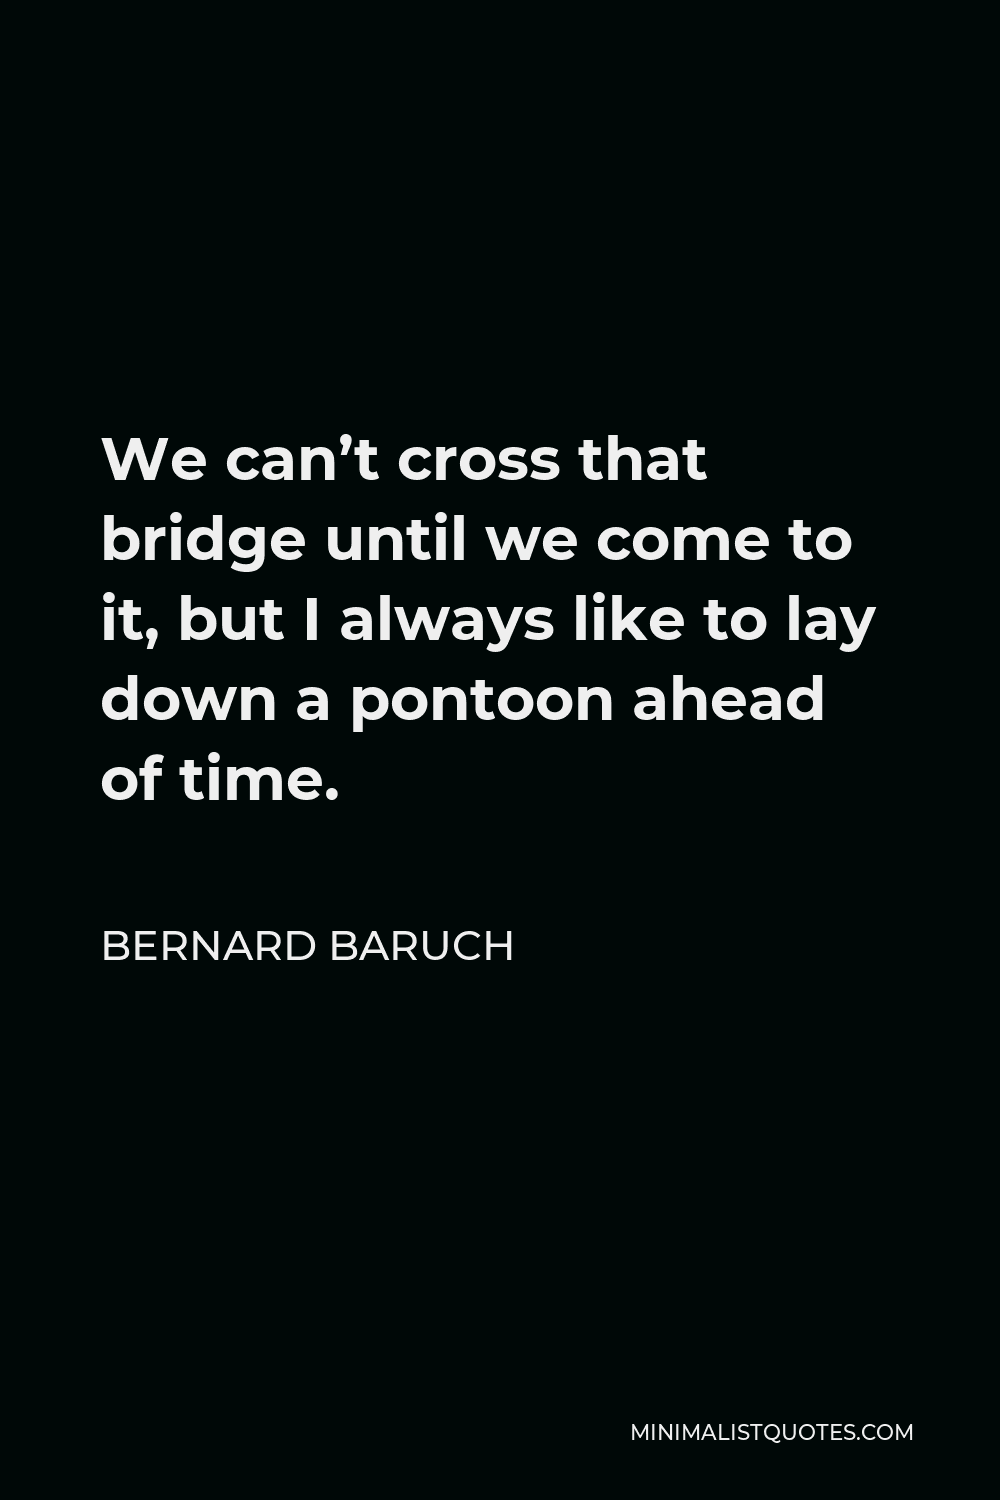 Bernard Baruch Quote - We can’t cross that bridge until we come to it, but I always like to lay down a pontoon ahead of time.